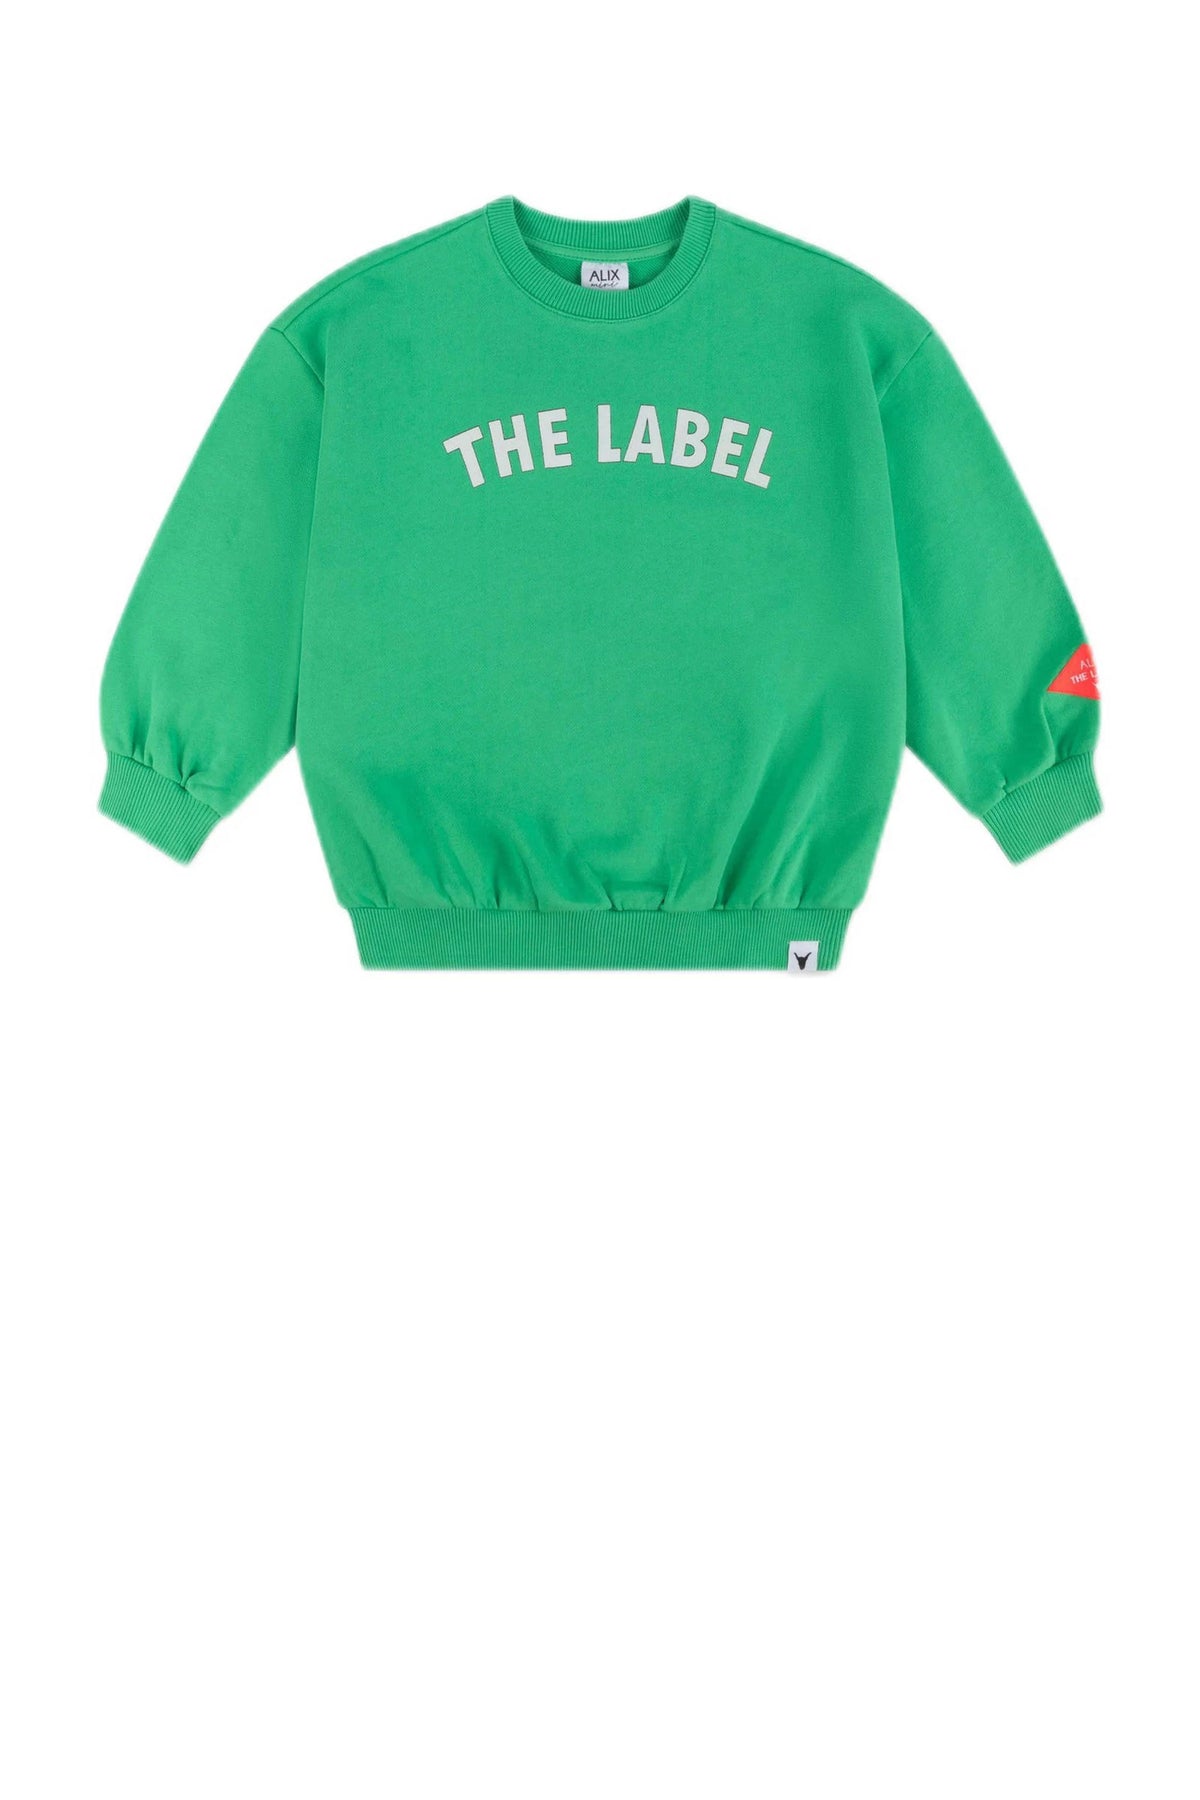 The label sweater green, Alix the label